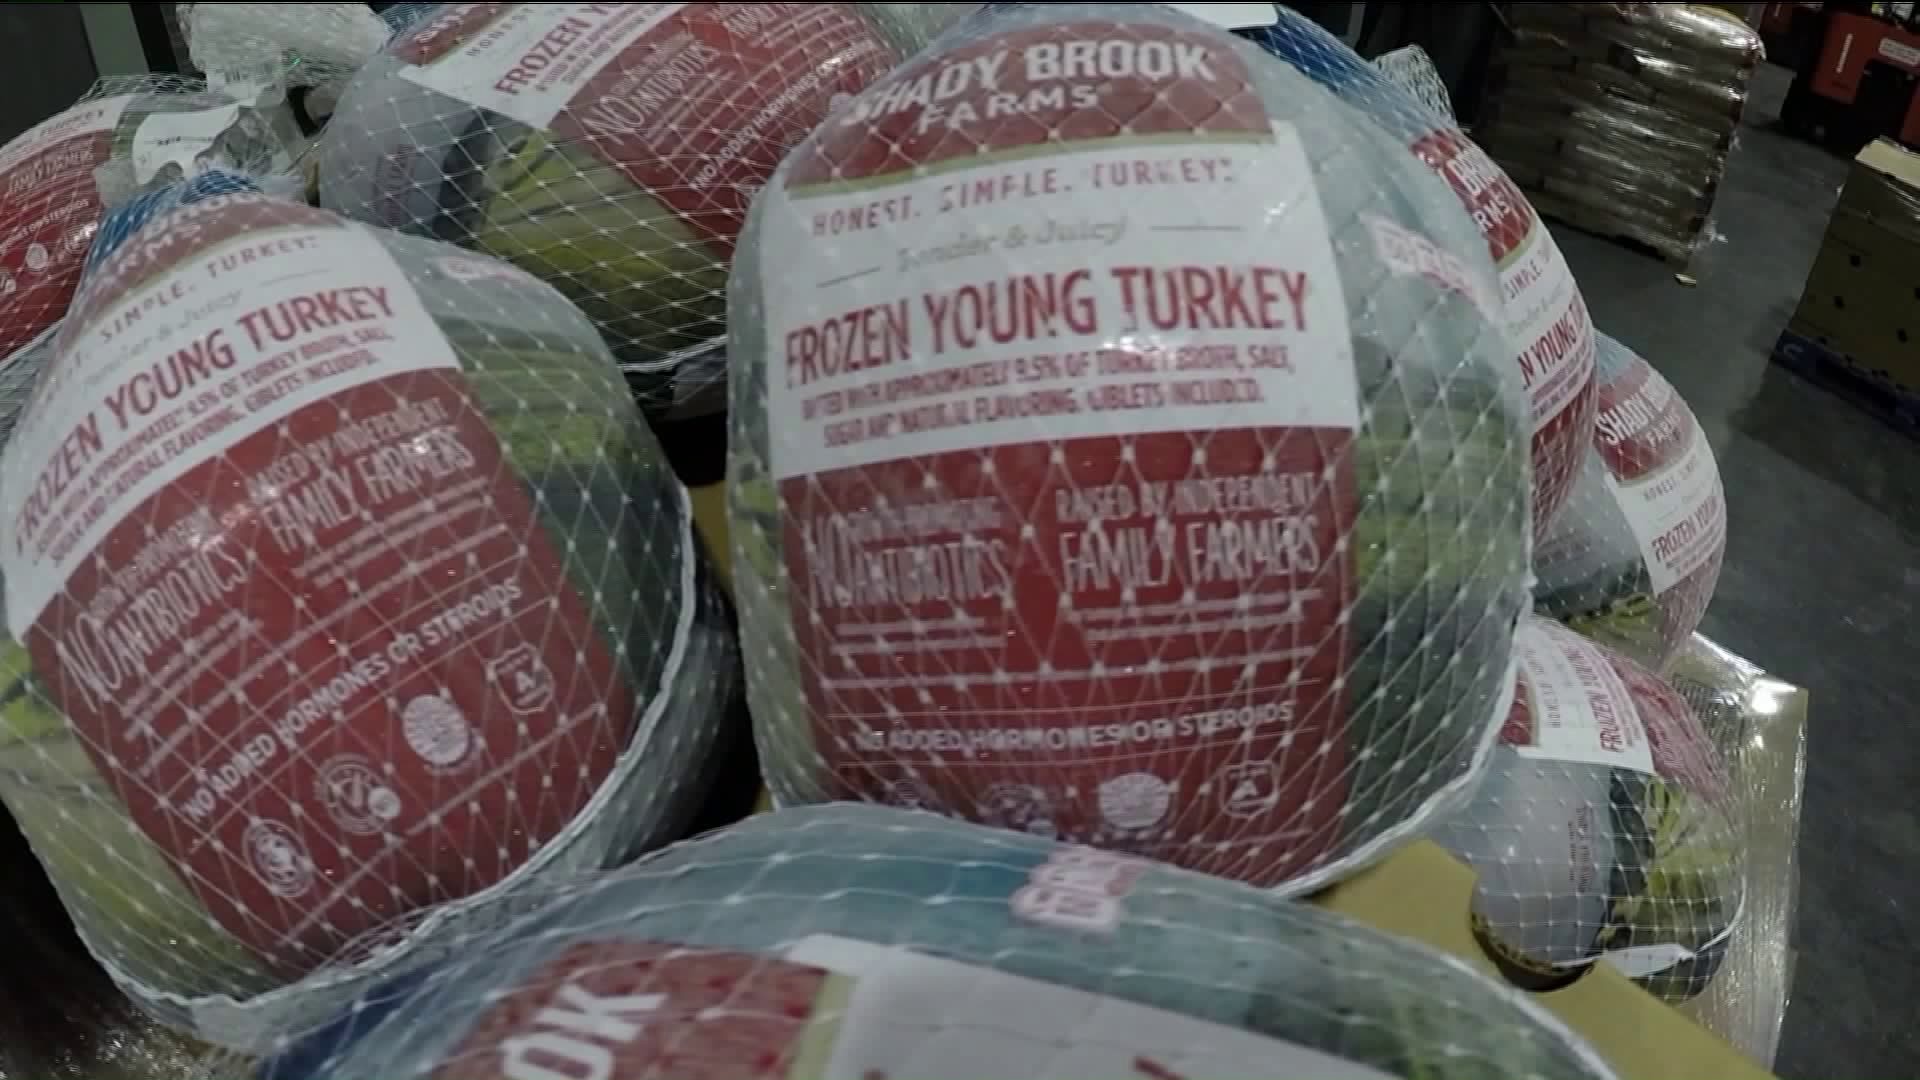 A supersized turkey drive in Cheshire